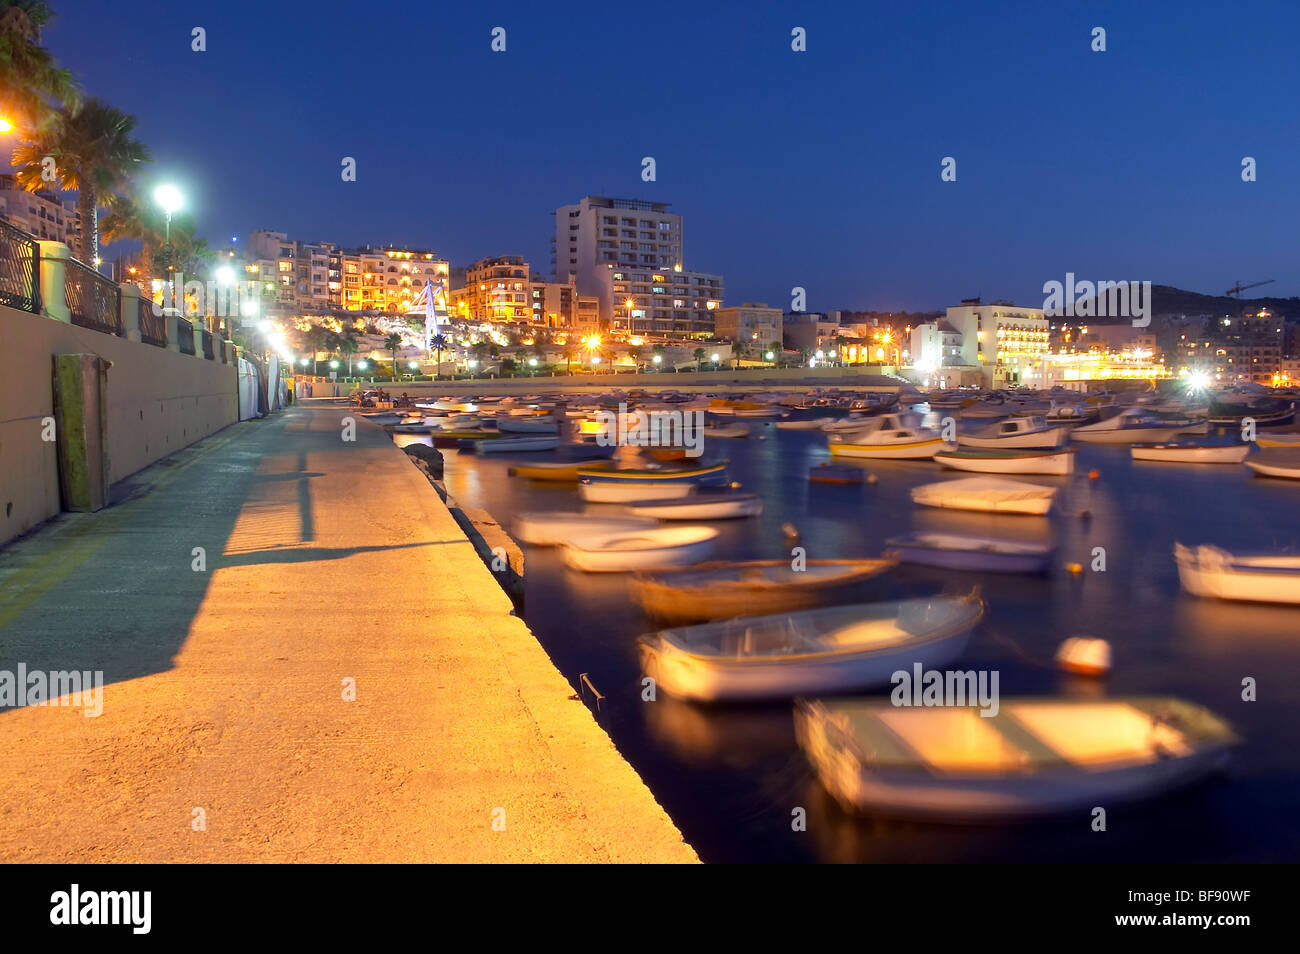 Bugibba is a small town and resort on St Paul's Bay near Qawra. It has an attractive harbour. Malta. Stock Photo